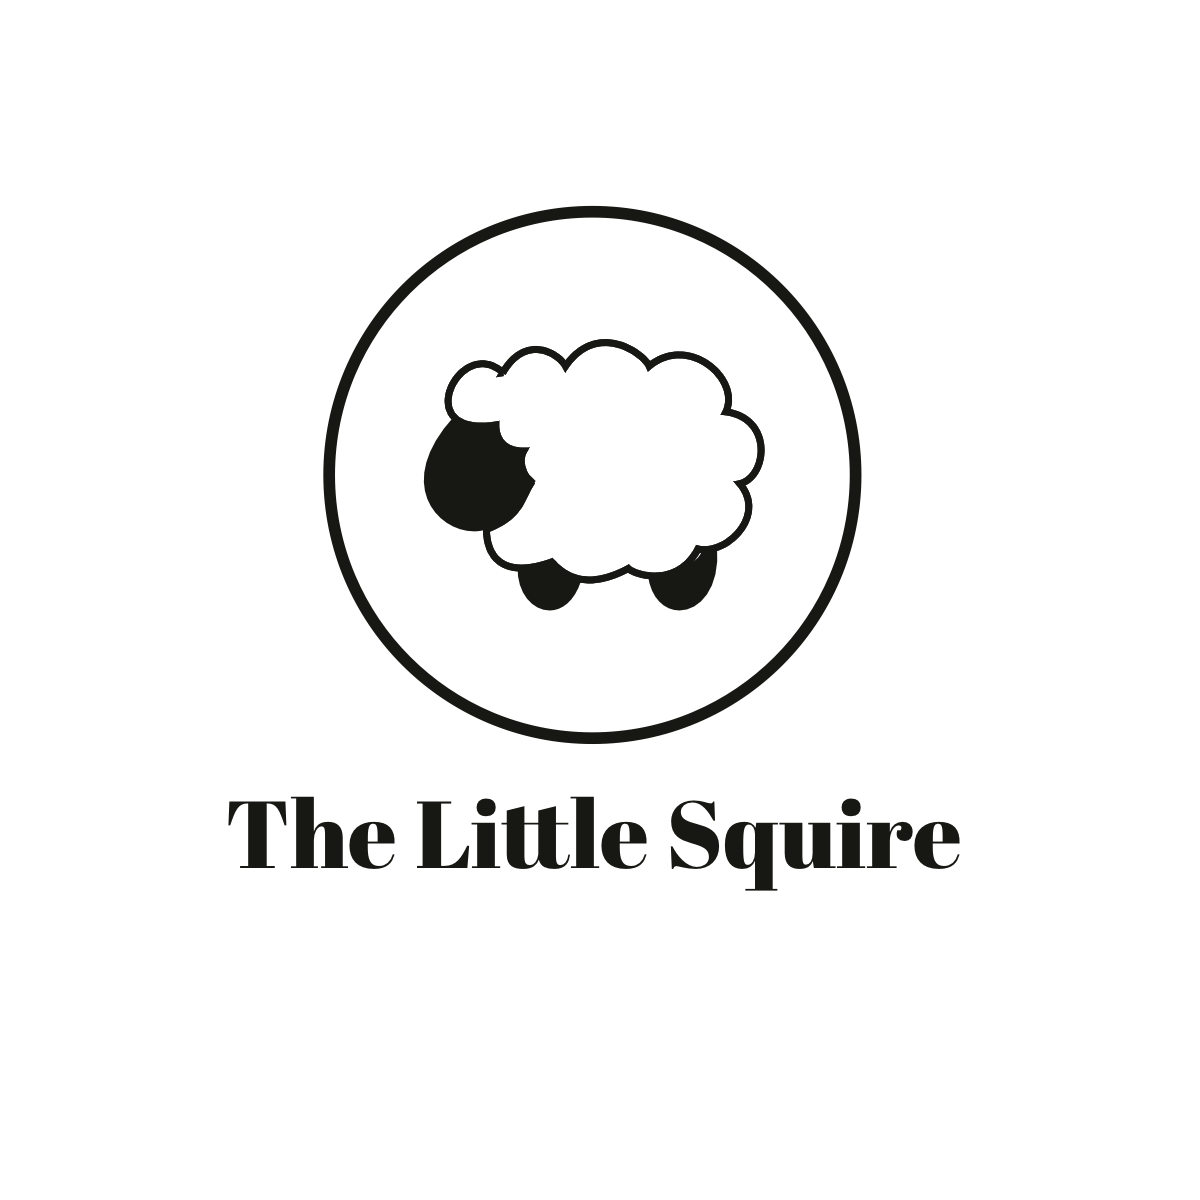 The Little Squire